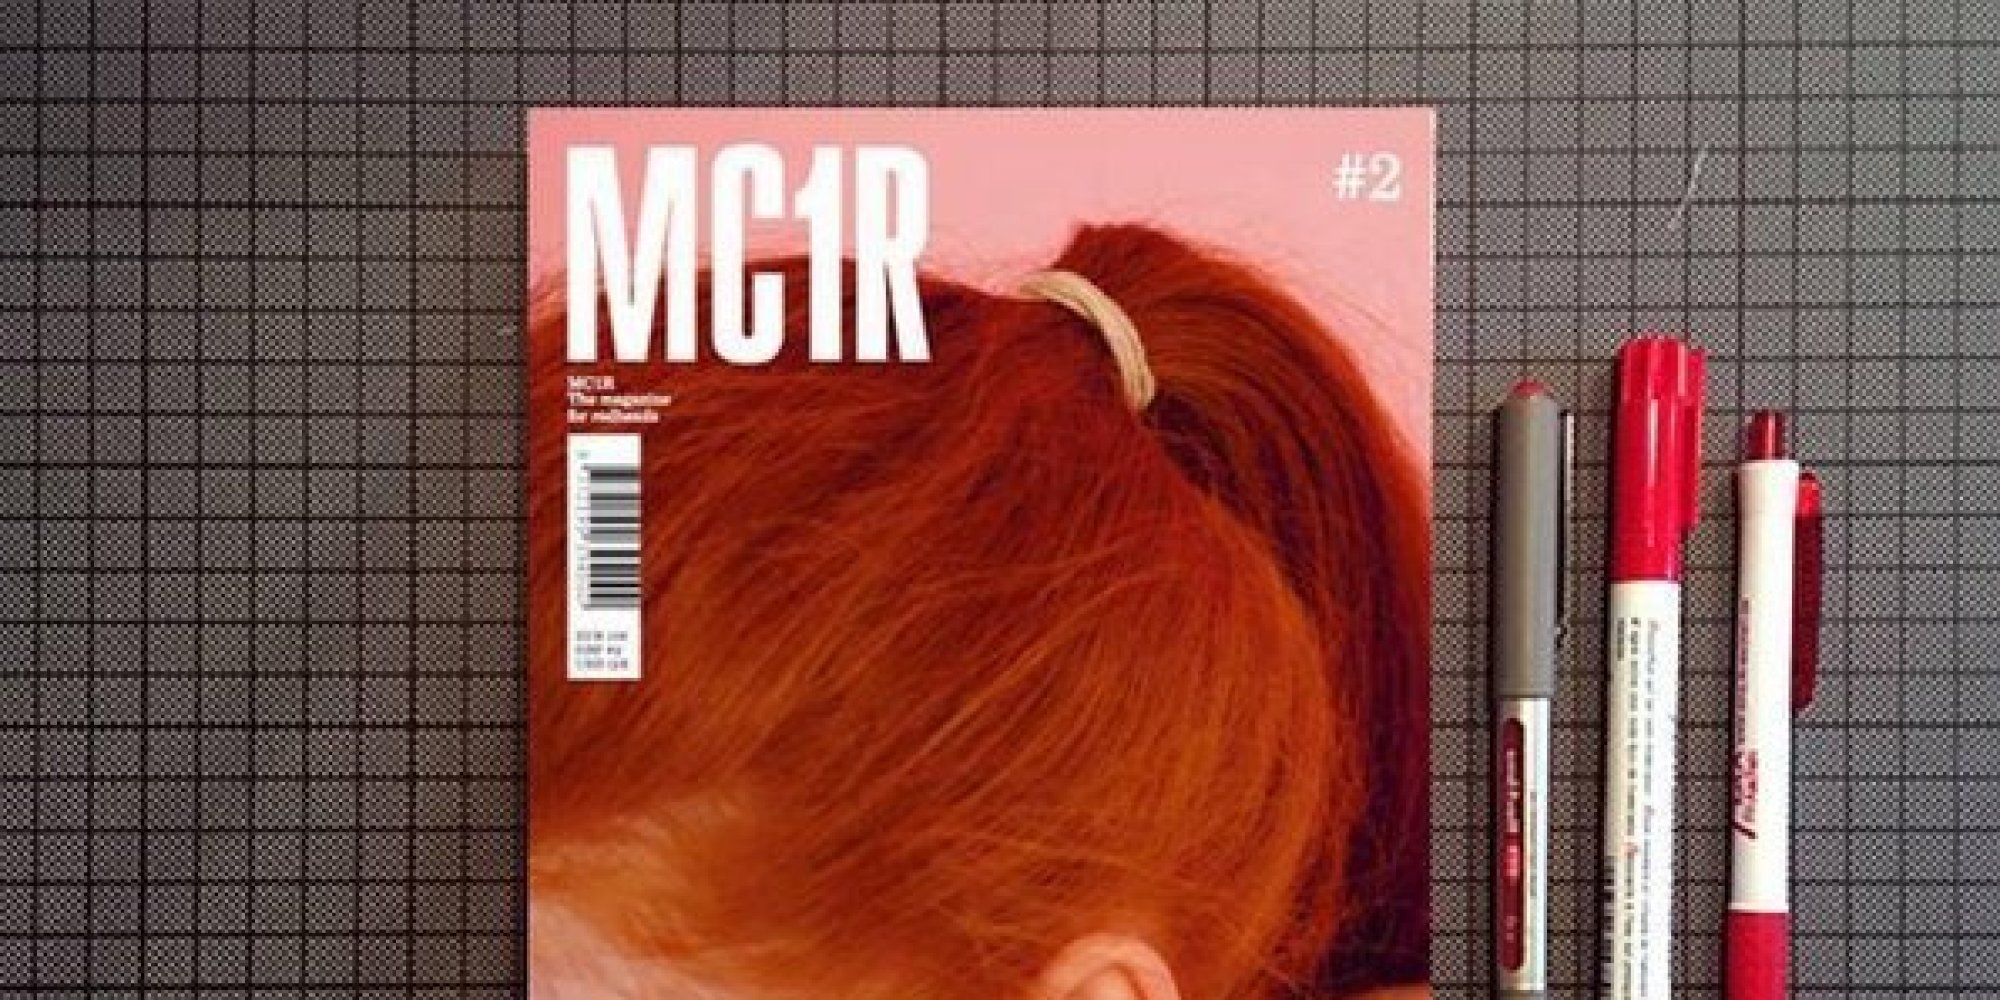 Mc1r Magazine Dedicated Entirely To Redheads Proves Being Ginger Is Awesome Huffpost Uk 